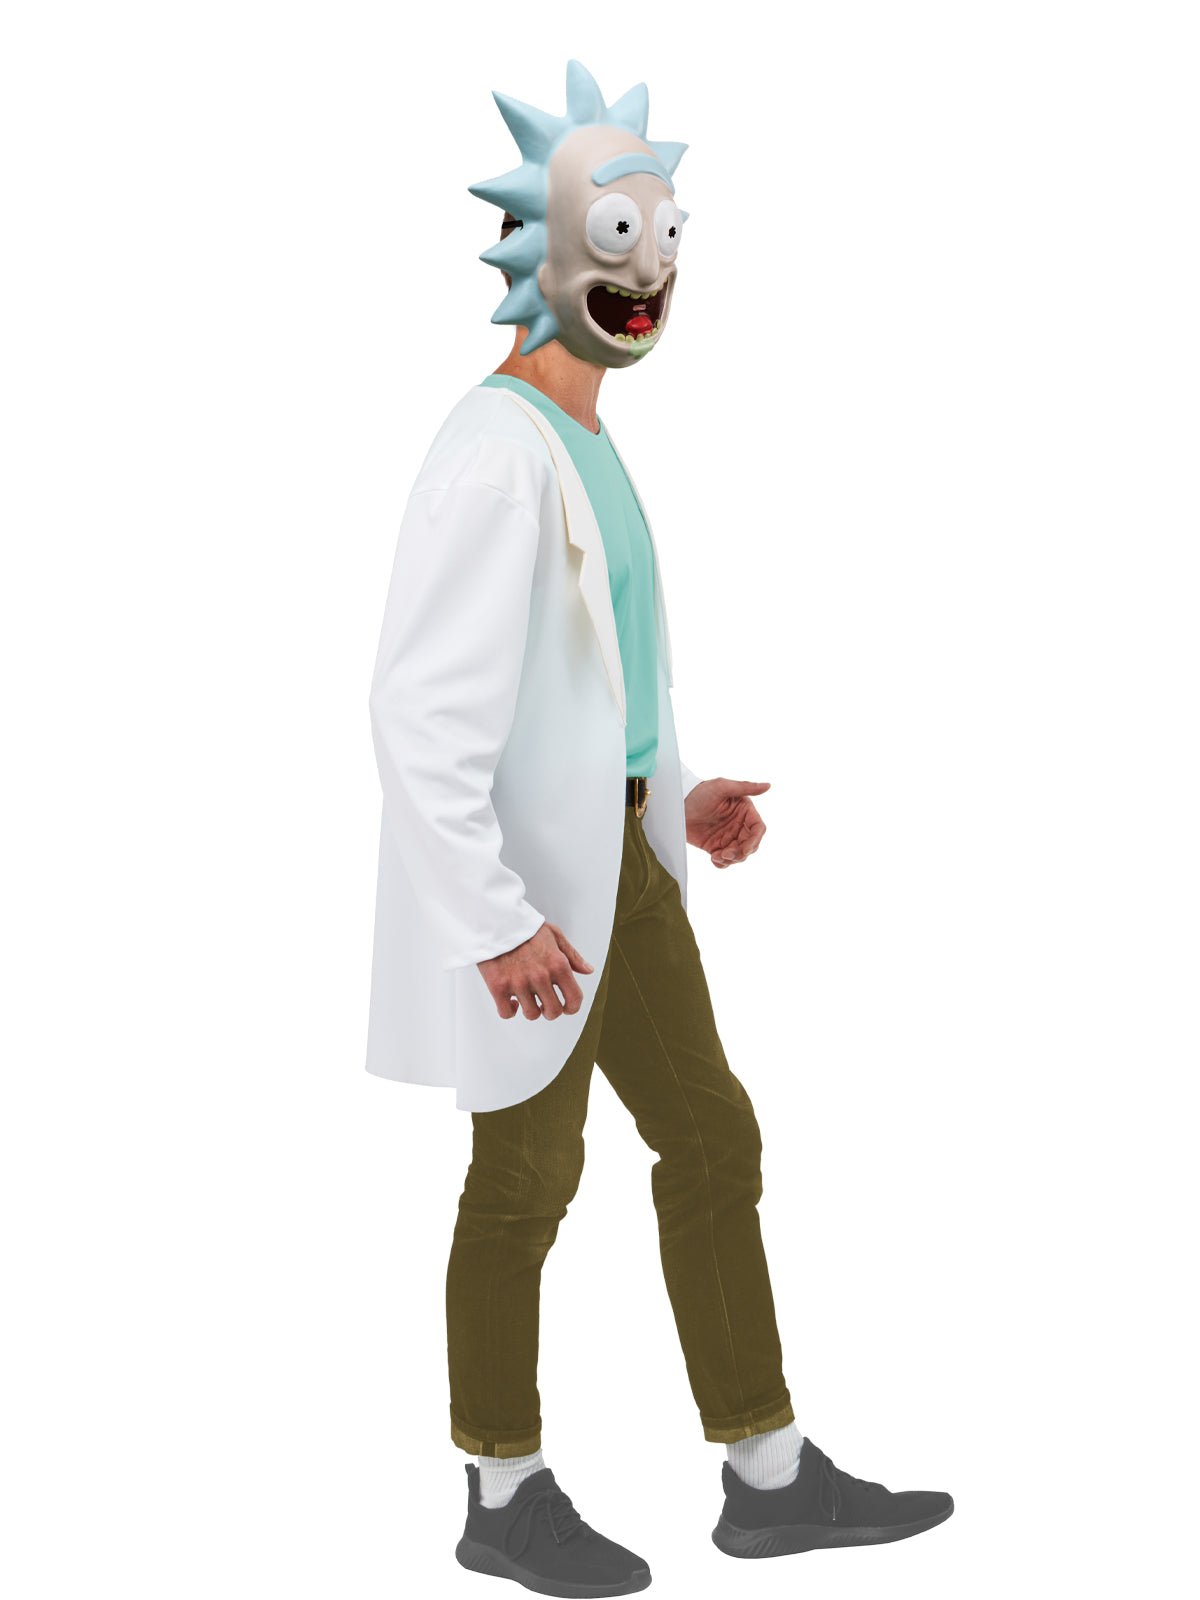 Rick's Costume: Be the Life of the Party